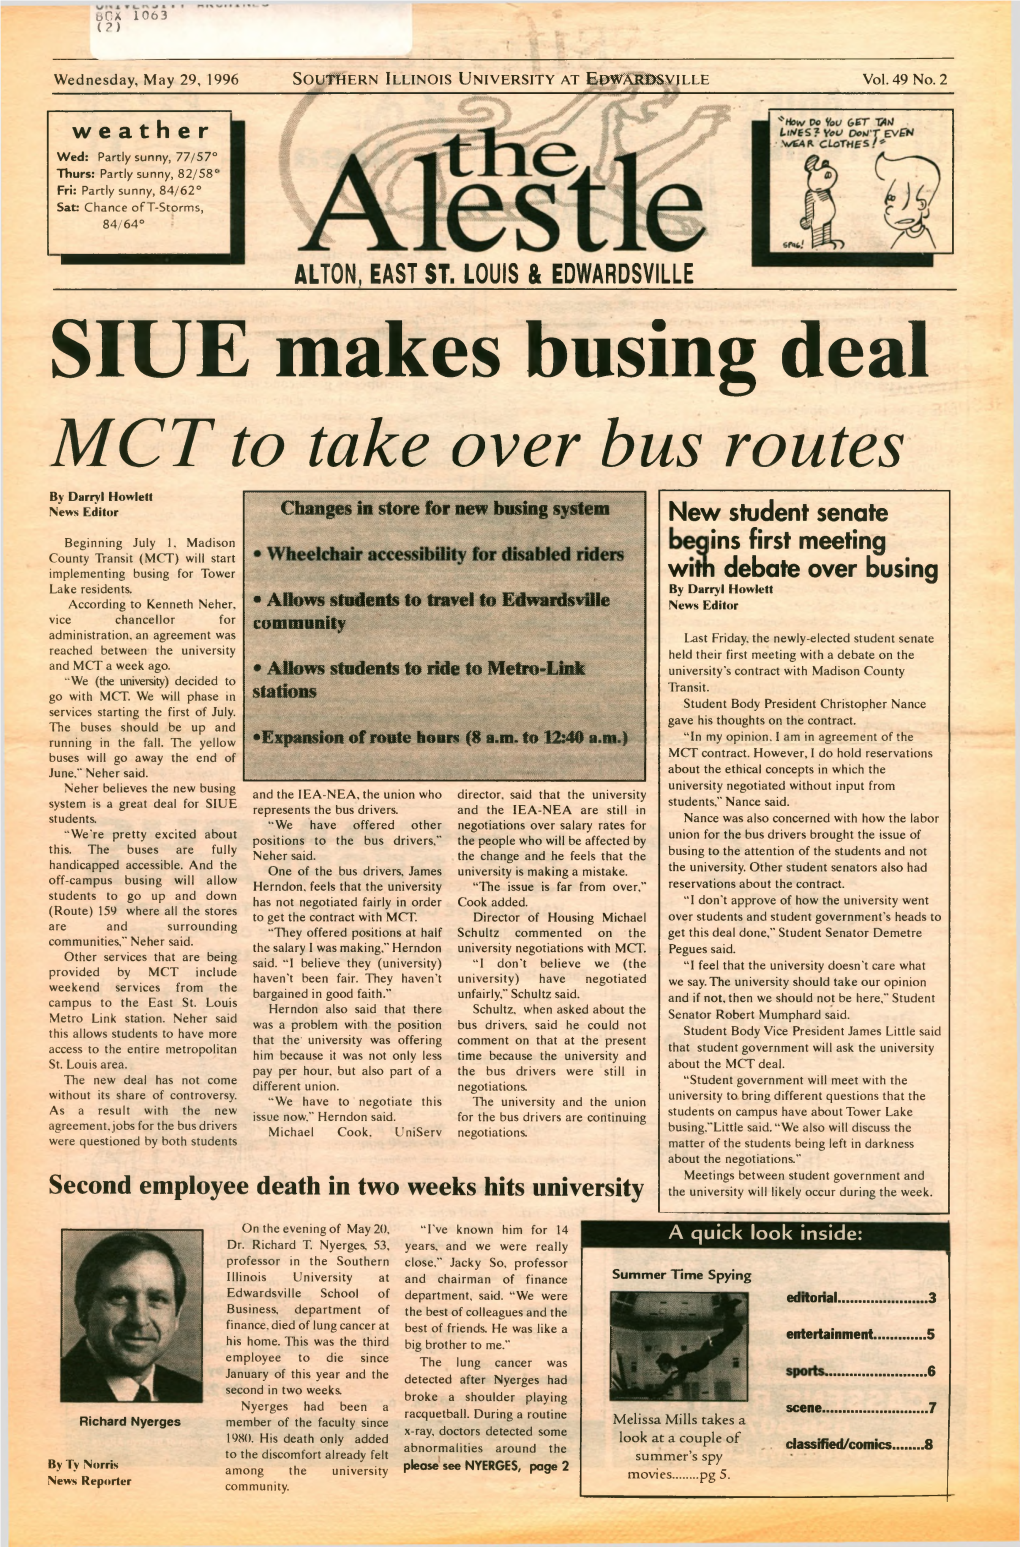 SIUE Makes Busing Deal